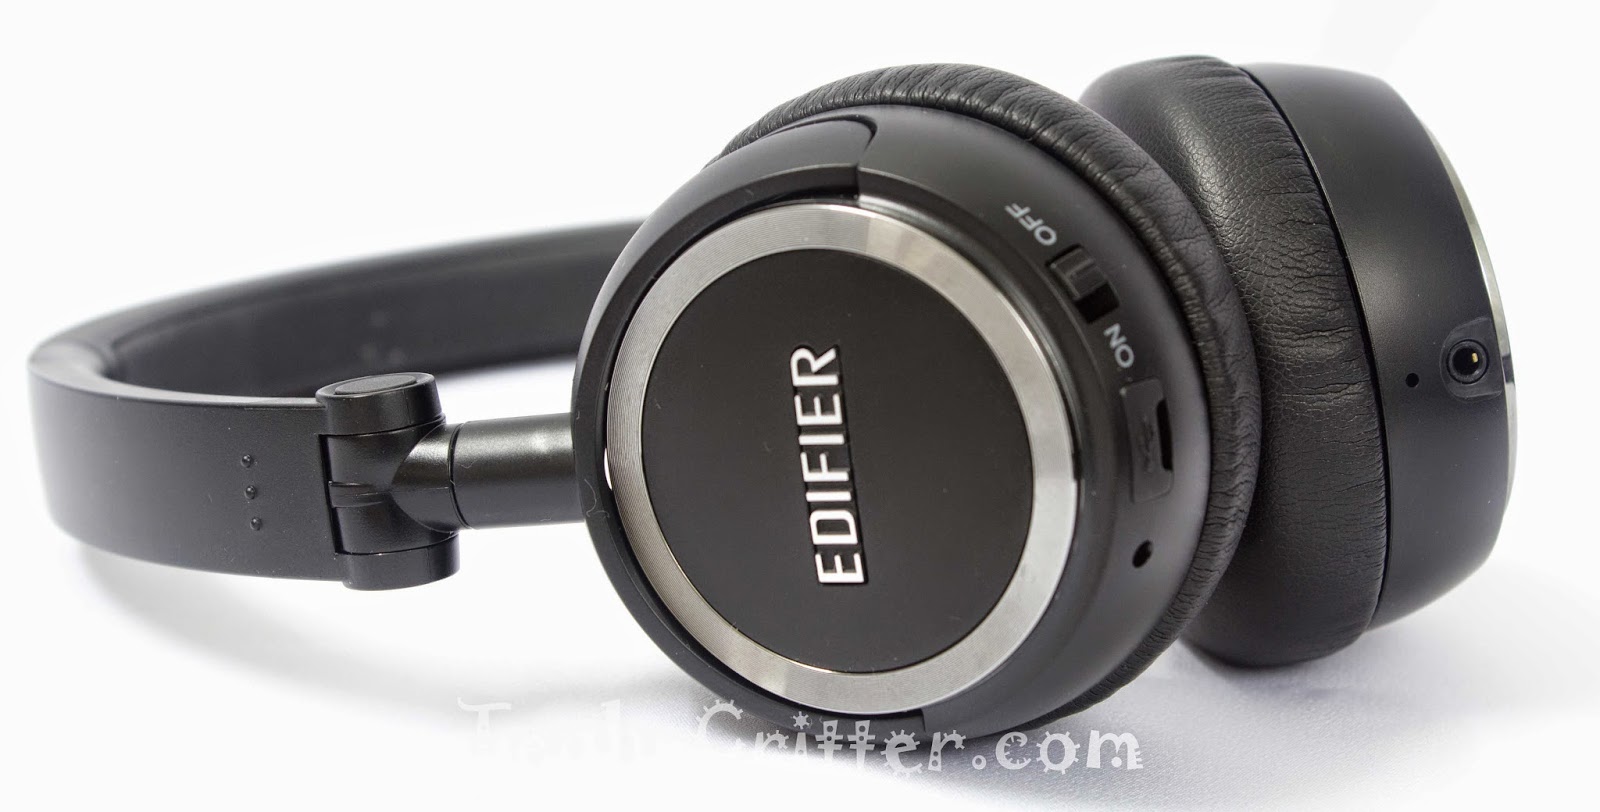 Unboxing & Review: Edifier W670BT Stereo Bluetooth Headset 28